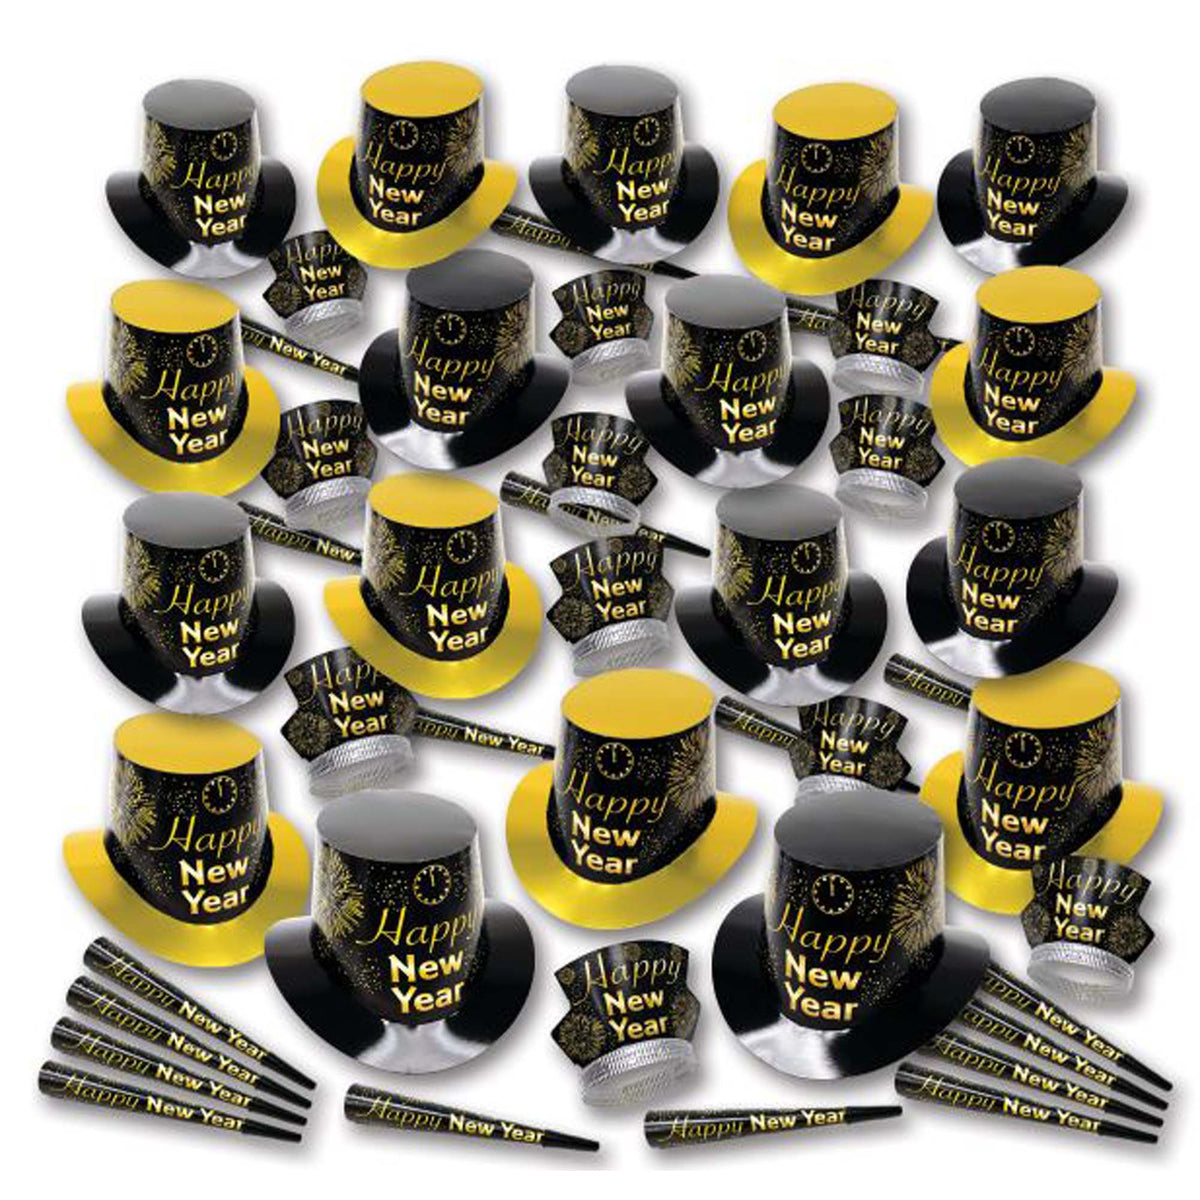 PARTY TIME MFG New Year Happy New Year Gold Fireburst Party Kit for 100 People, 1 Count 010372816000